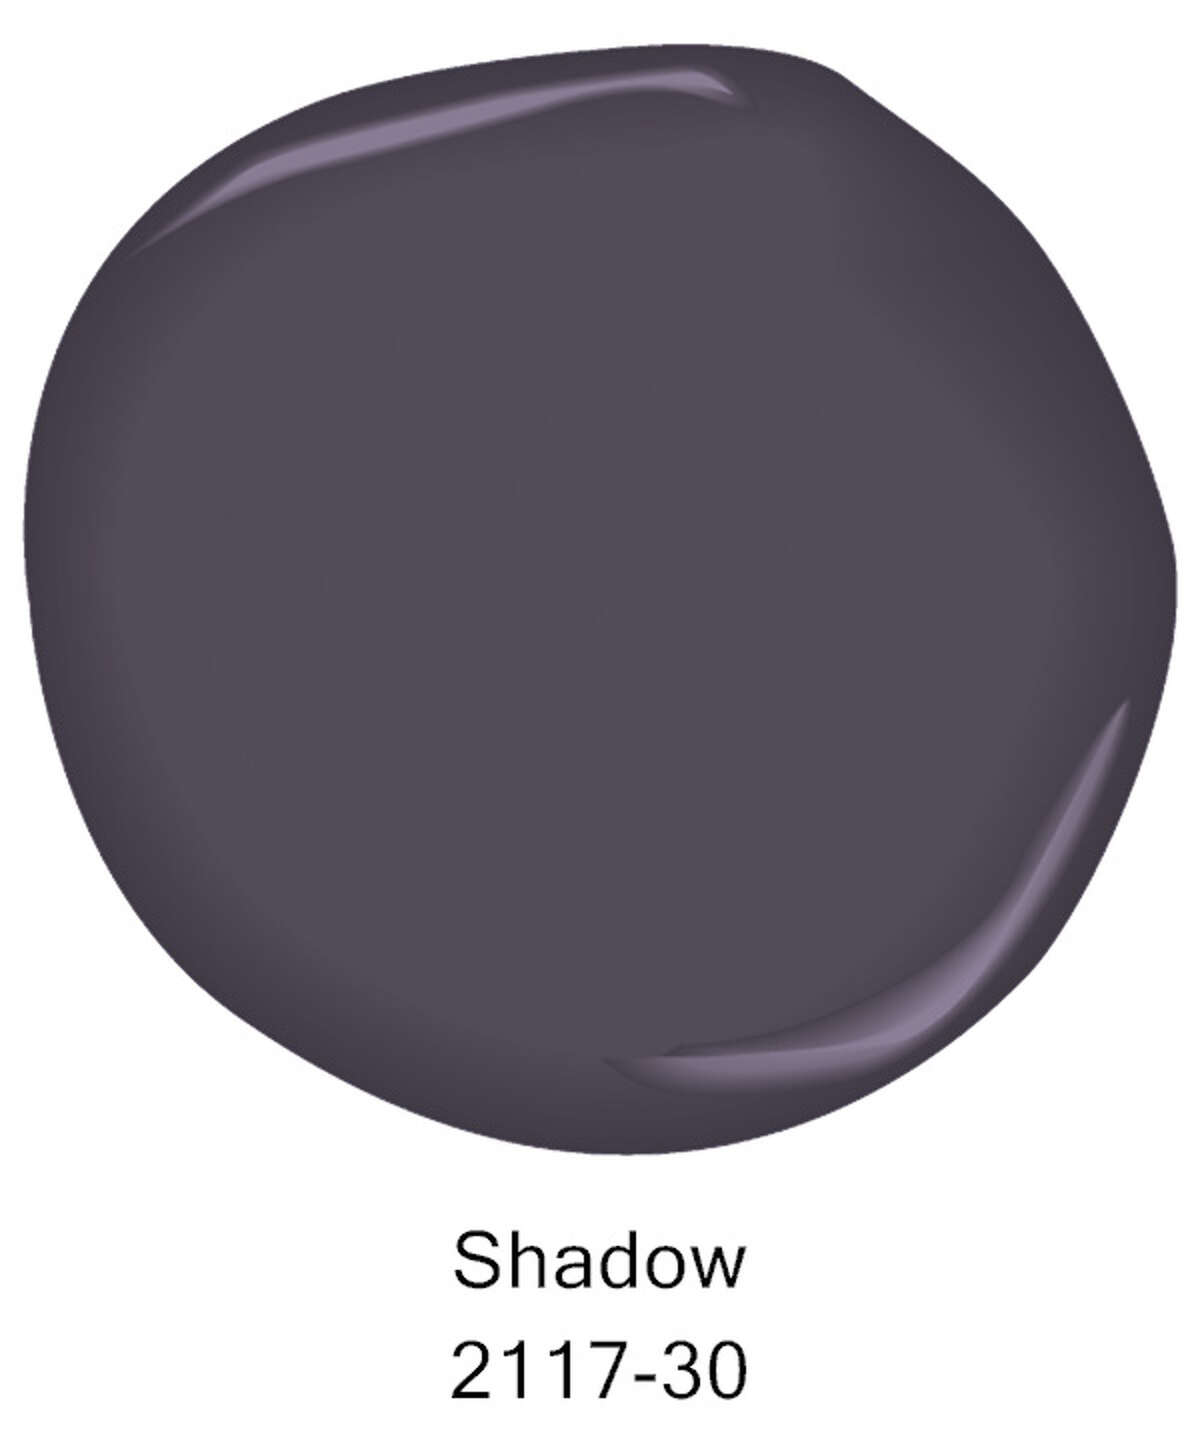 Benjamin Moore has named "Shadow" its 2017 Color of the Year.